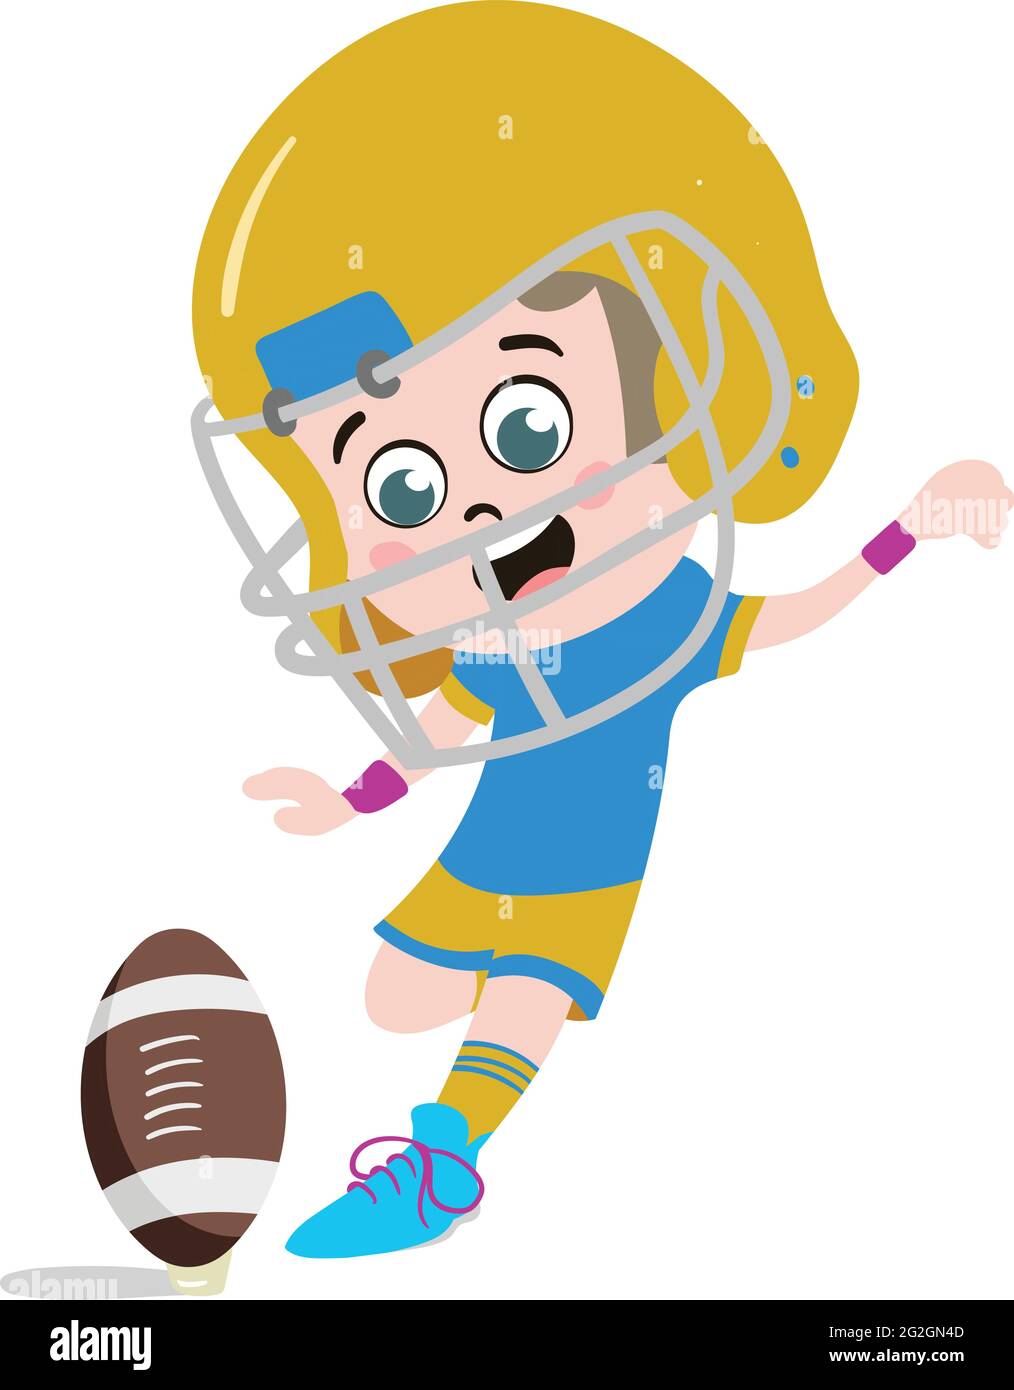 A Cute and Adorable Child Character in Cartoon Style. Kindergarten Preschool Kid Dressed as Professional Rugby Player. Small Kid kicking ball towards Stock Vector